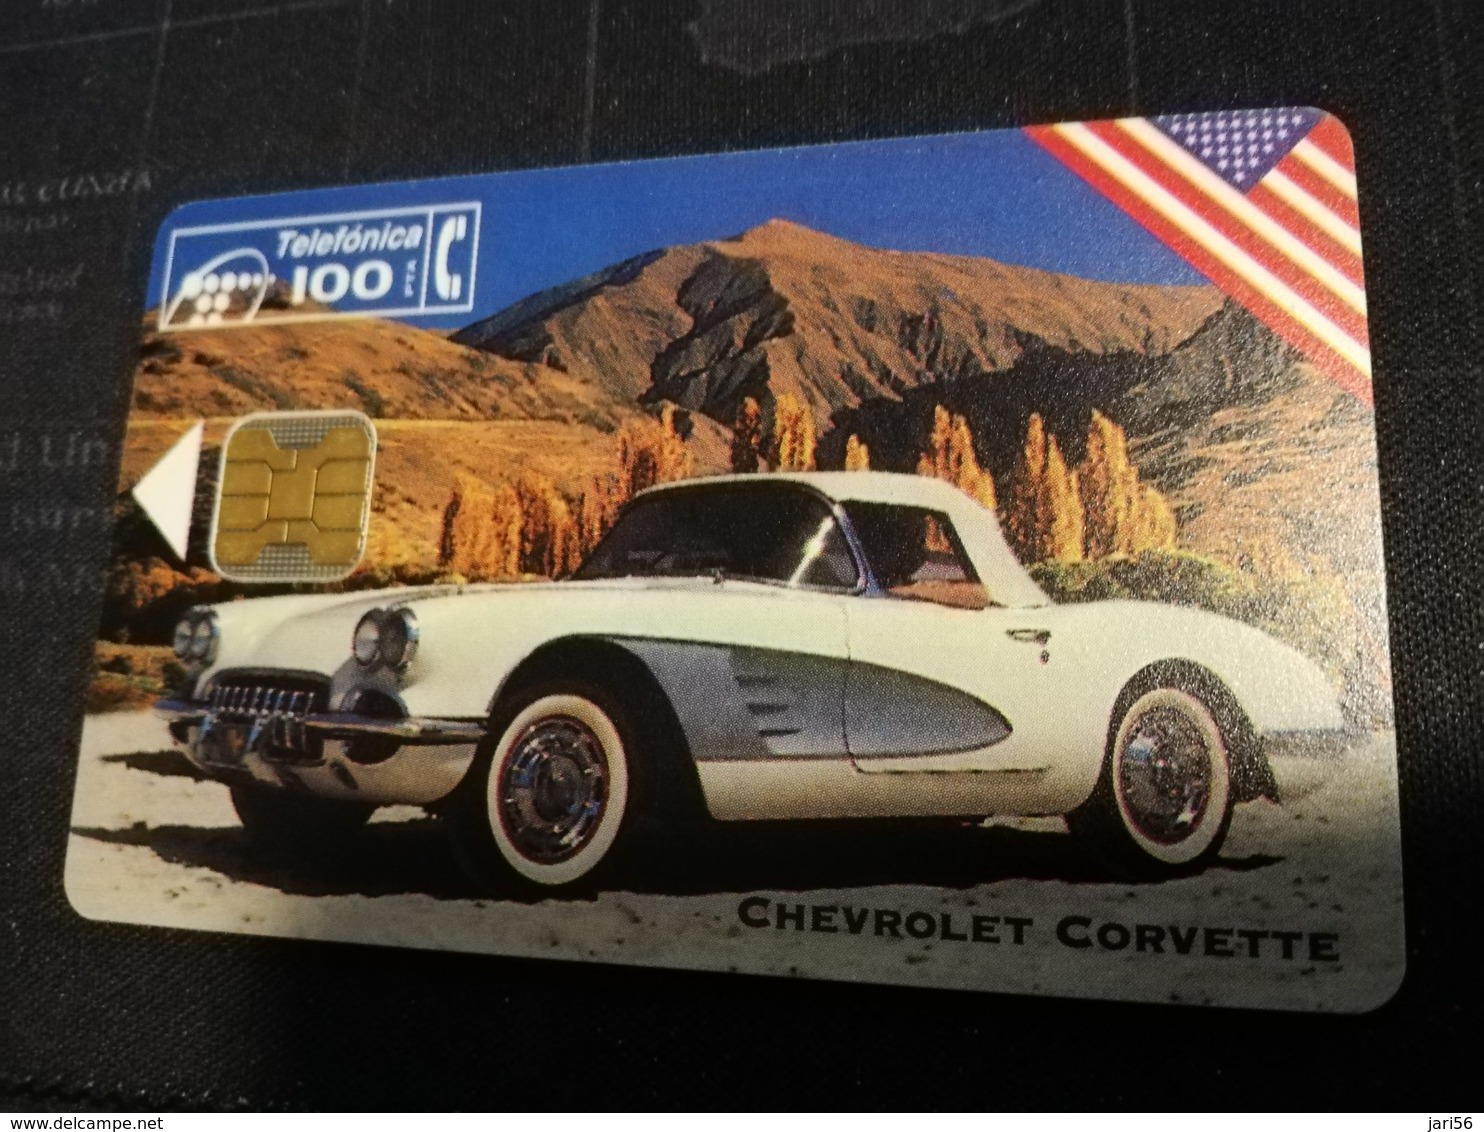 SPAIN/ ESPANA Nice  Fine Used  AUTOMOBILES  CHEVROLET  TIRAGE 4000  CHIP CARD  **1372** - Private Issues